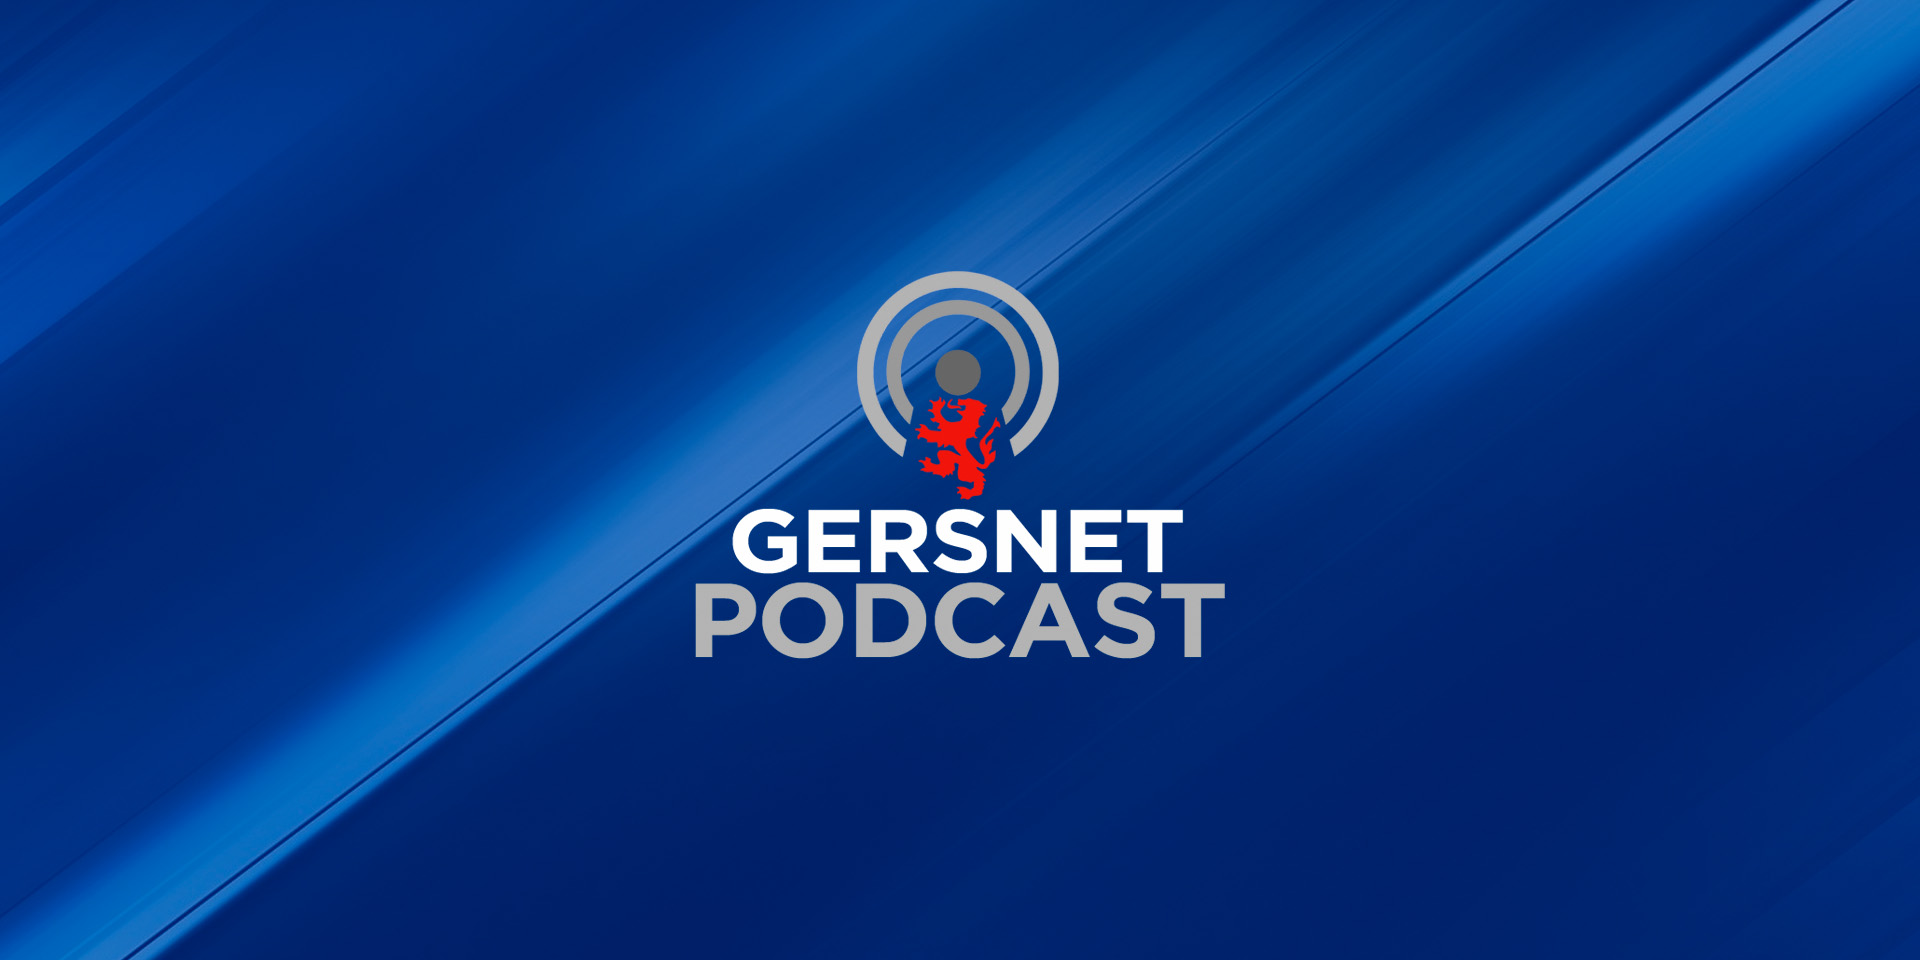 Gersnet Podcast 324 - A welcome return